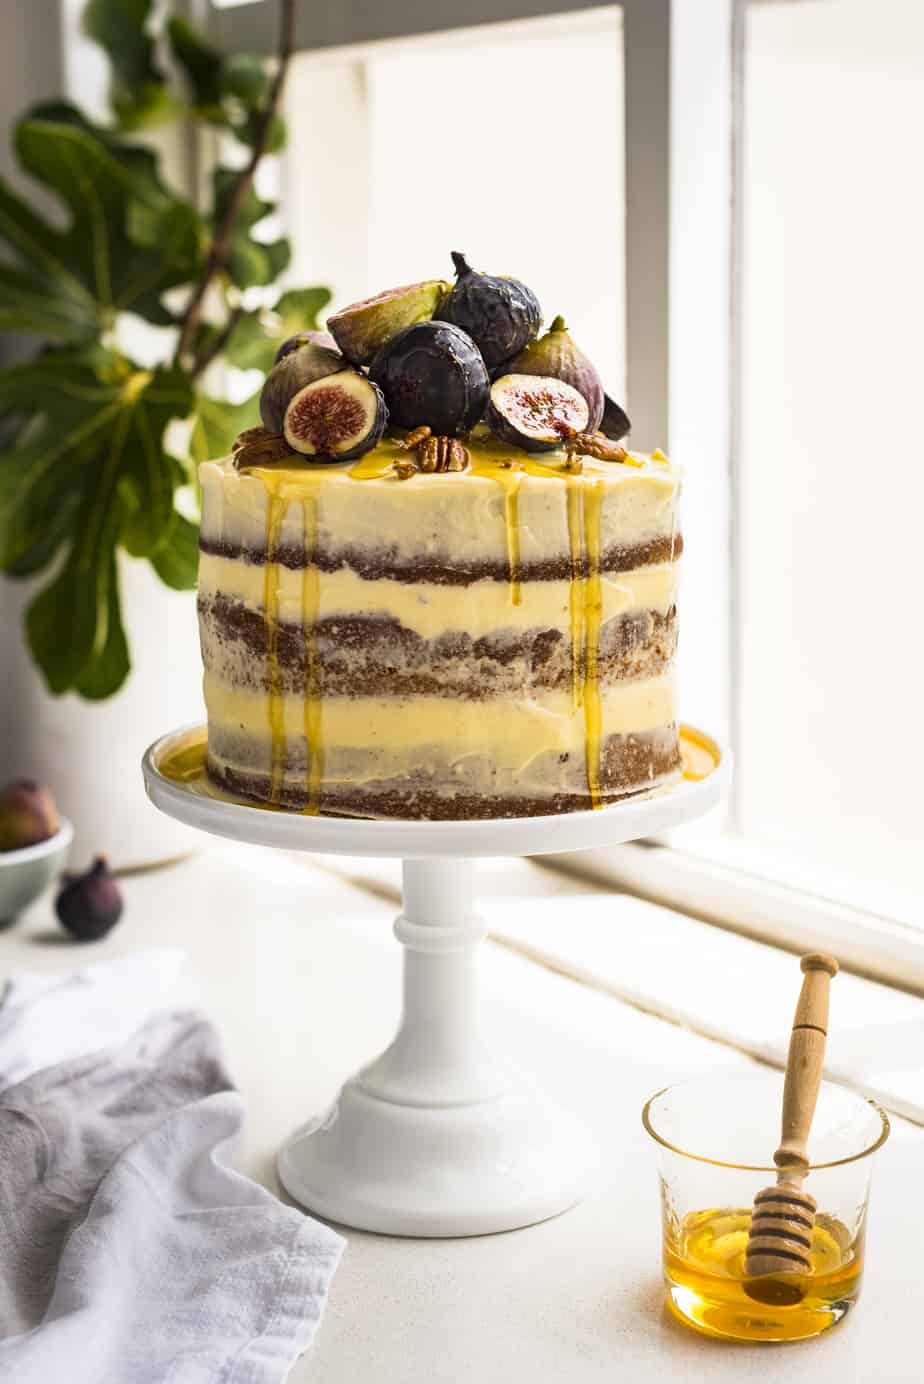 This Earl Grey Cake with Honey Mascarpone Frosting and Fresh Figs is the perfect recipe for World Baking Day, made with Stork Bake to keep it fresher for longer, it's bound to have everyone licking their plates clean.